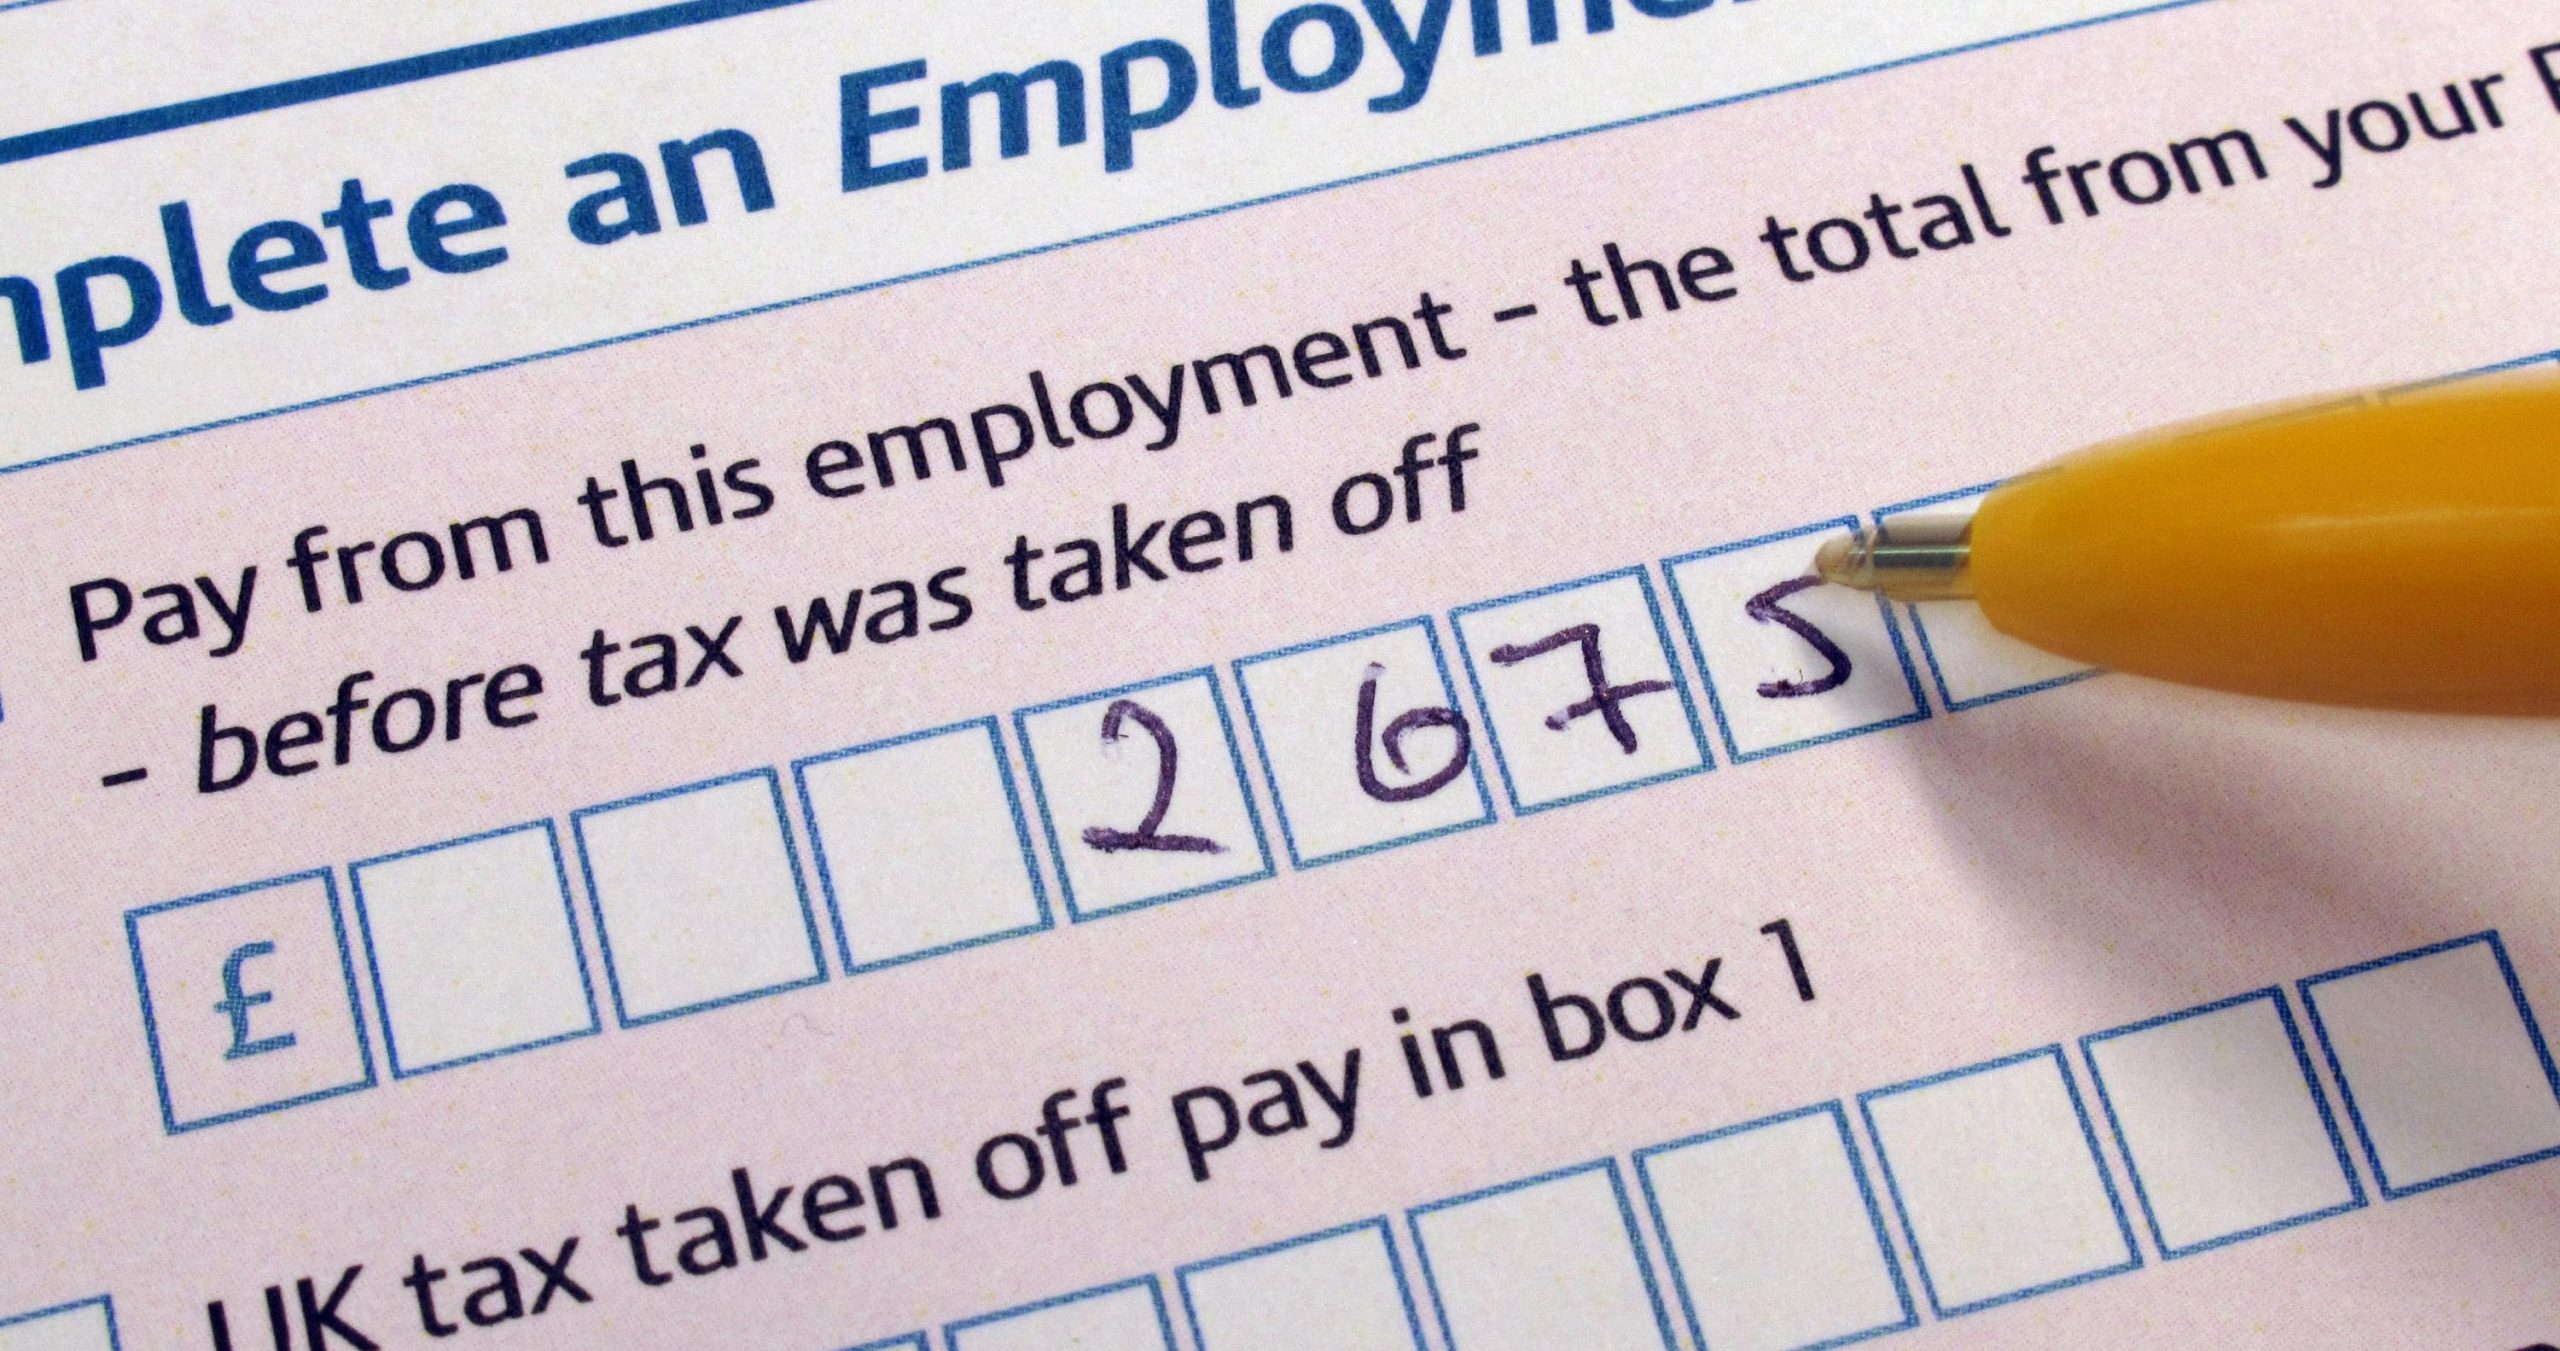 no-penalty-for-late-2019-20-self-assessment-filing-says-hmrc-car